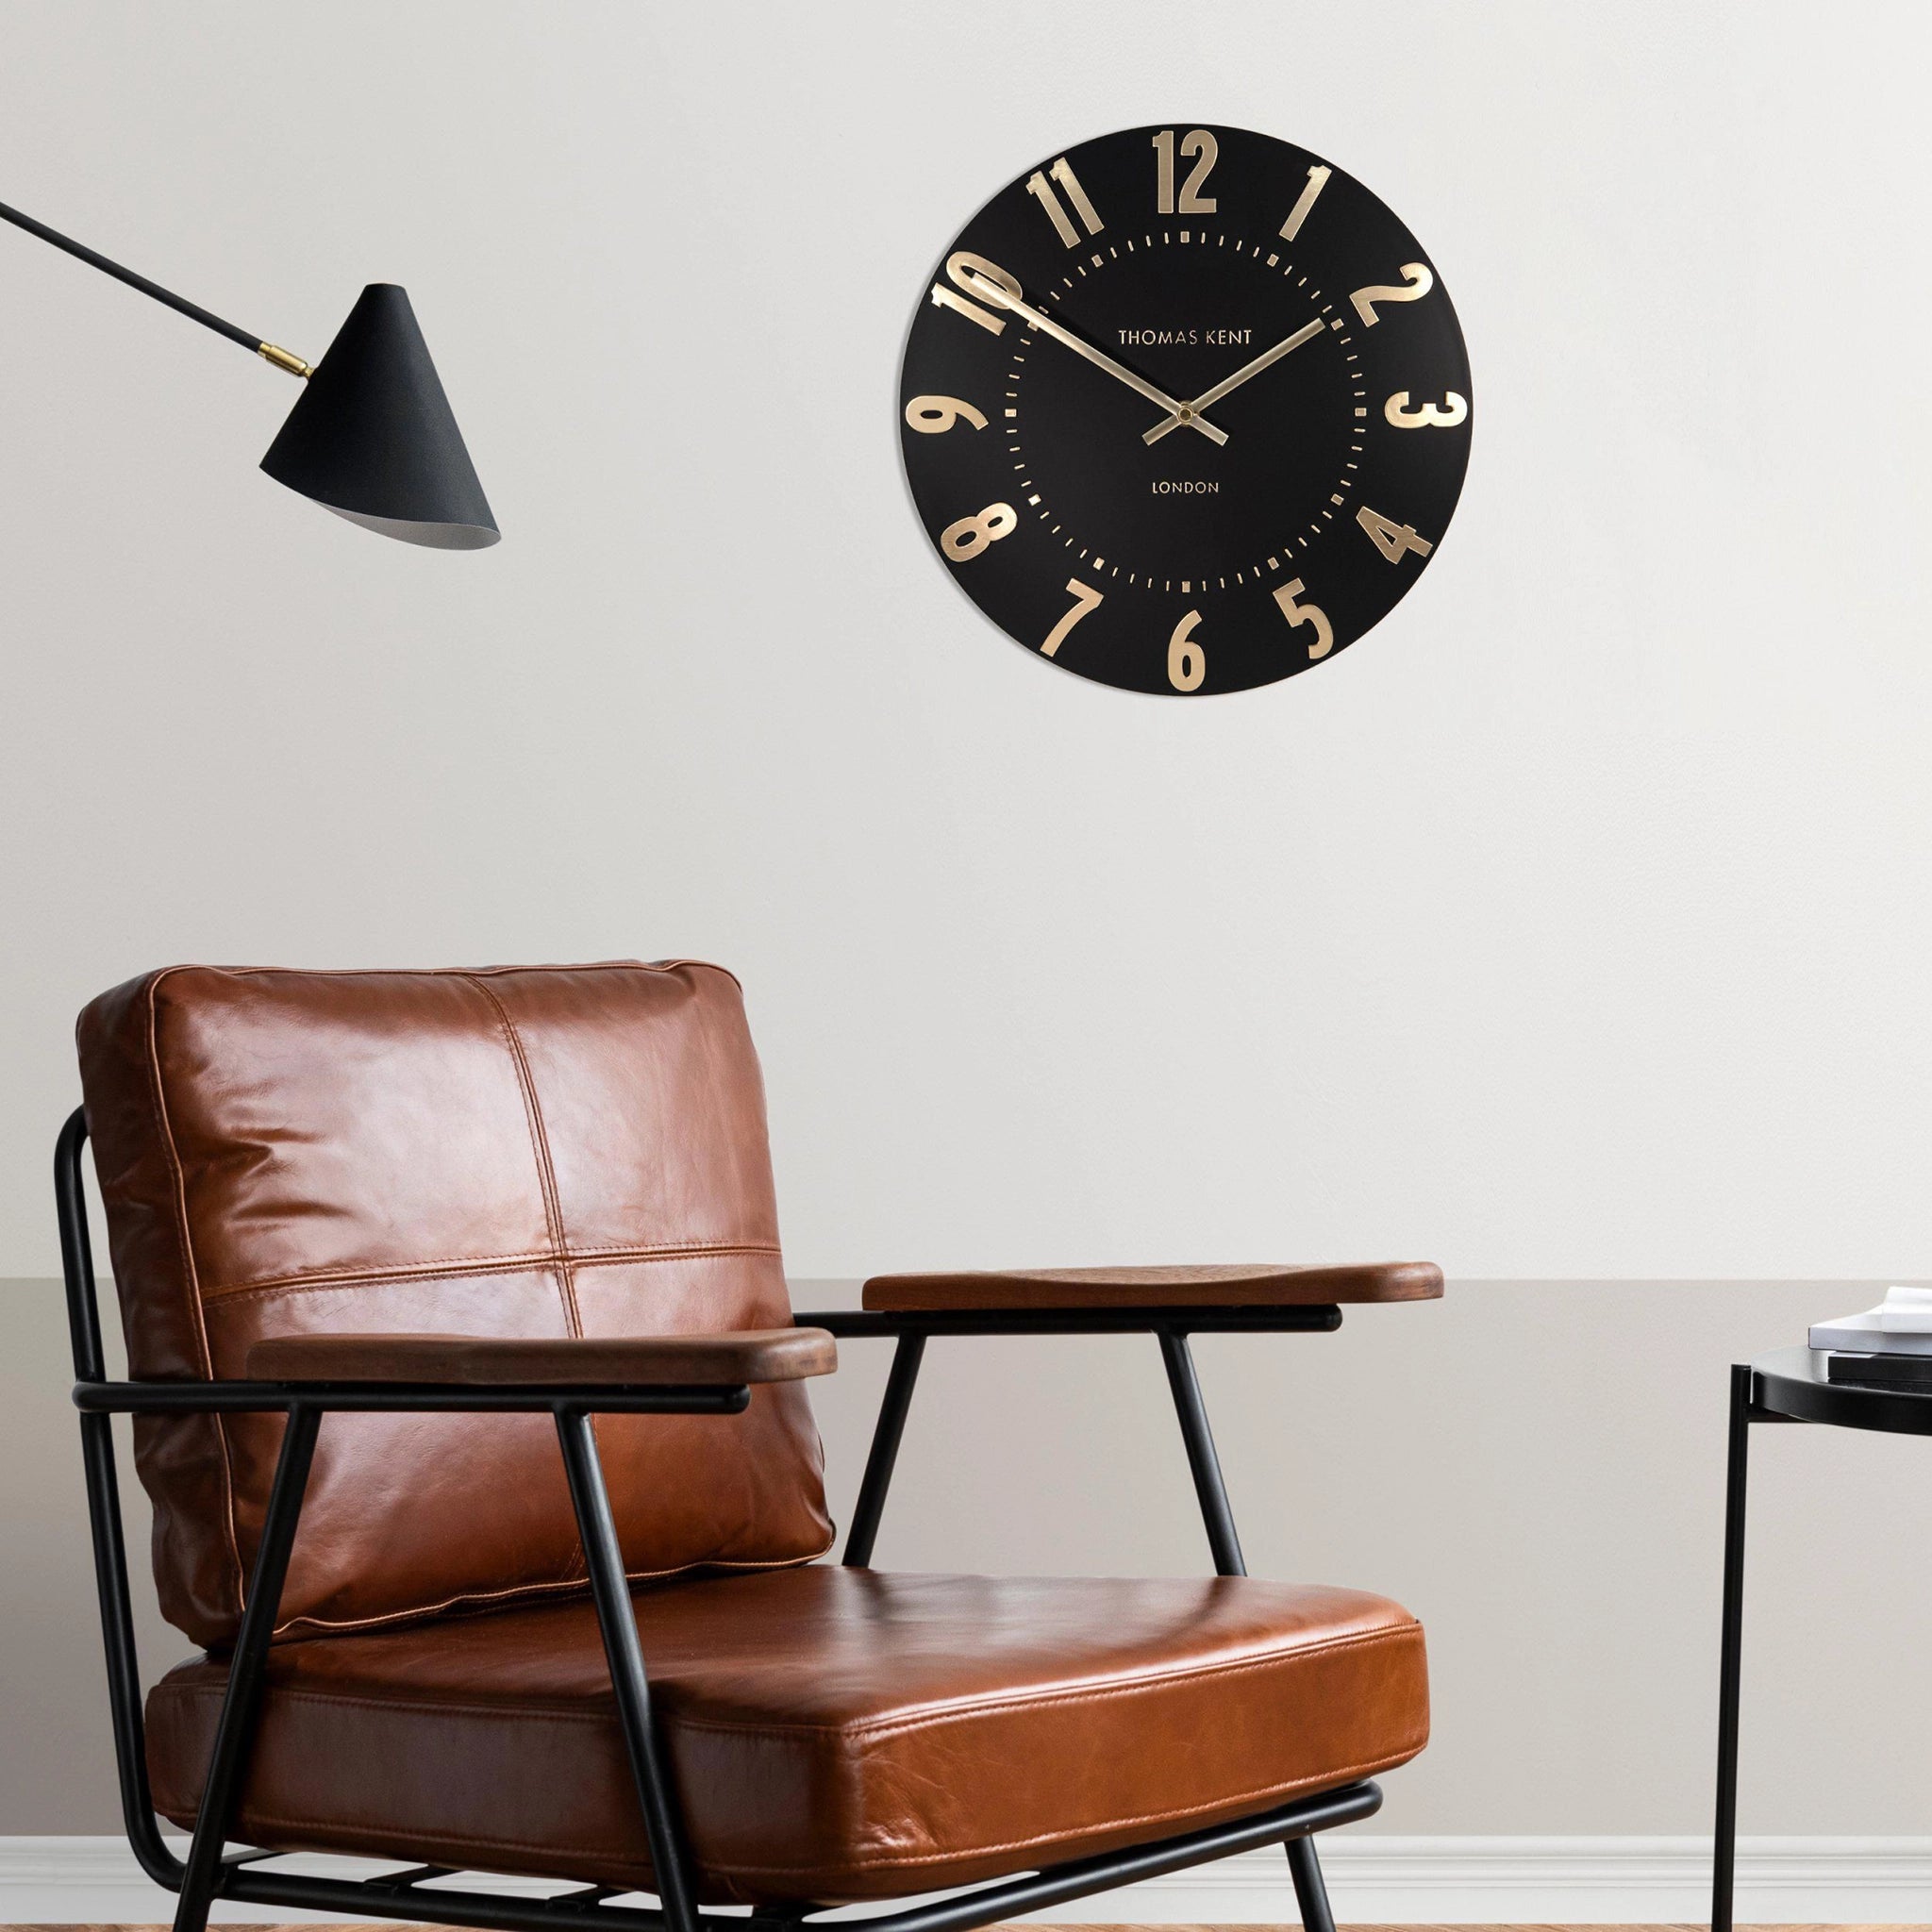 A simple and modern round wall clock in a black colour with gold hands and numbers on wall